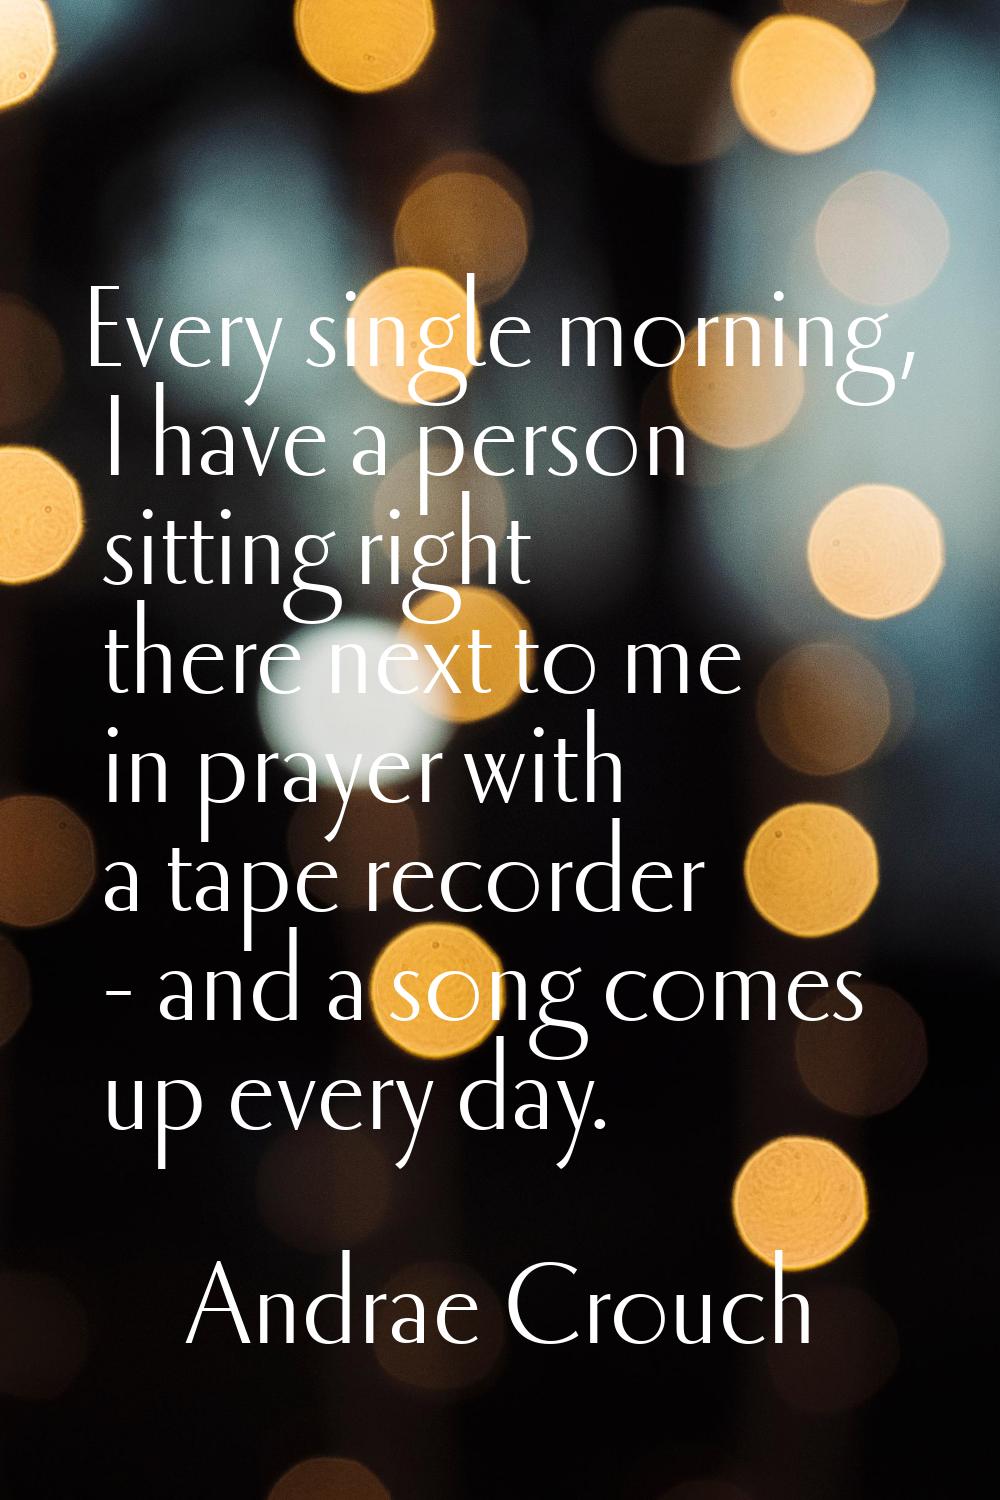 Every single morning, I have a person sitting right there next to me in prayer with a tape recorder